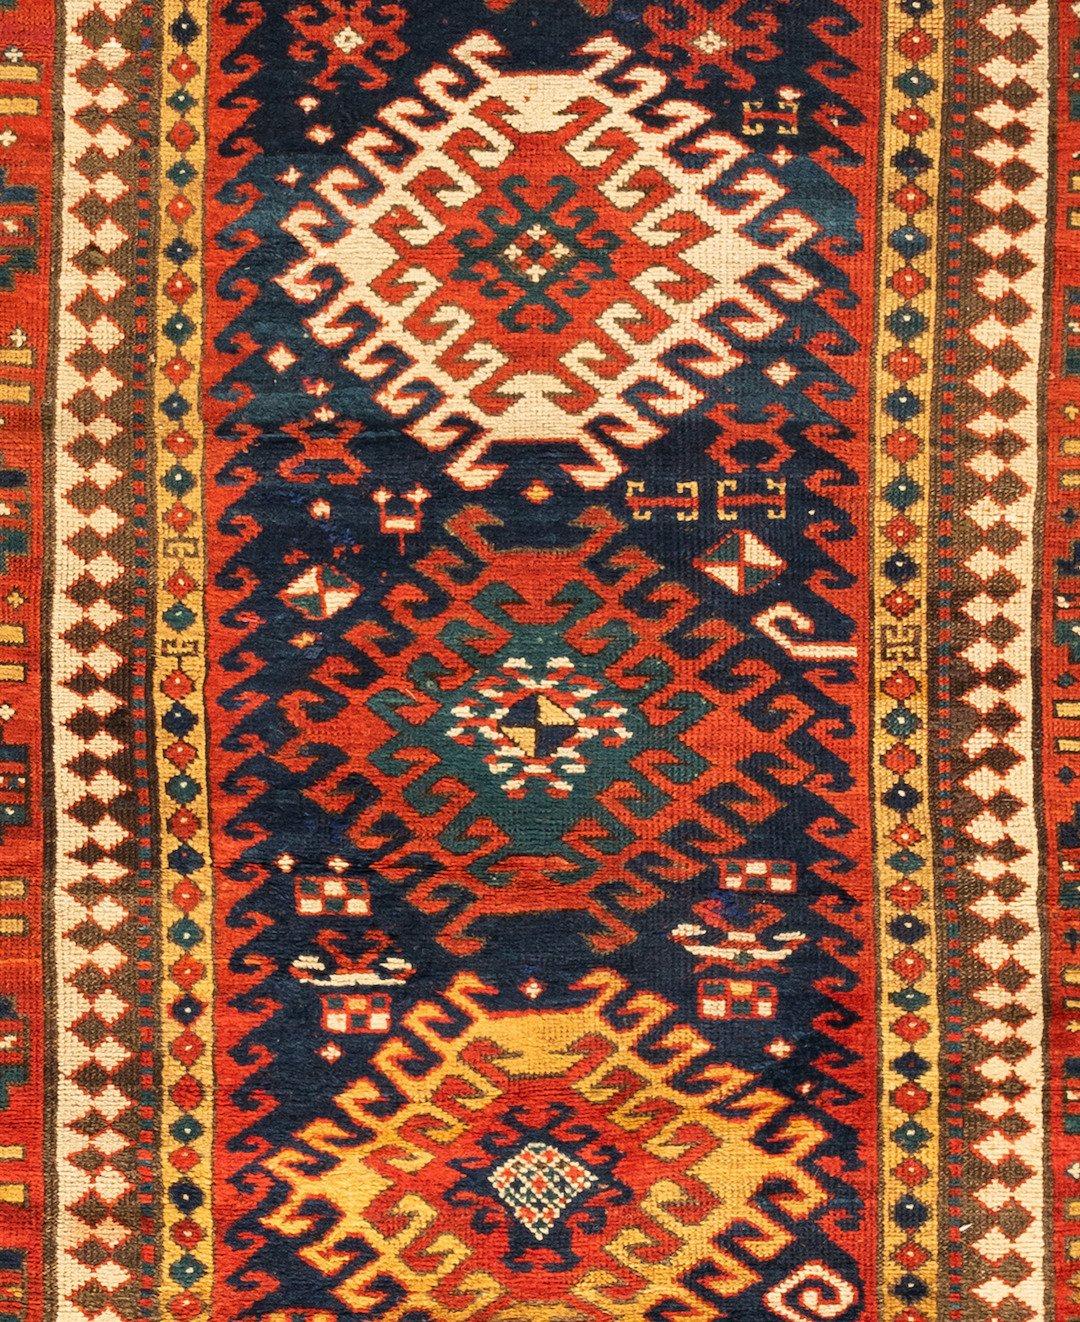 This lovely antique Caucasian Tribal Geometric navy blue Kazak rug measures 4.7 x 8 ft. and is from the 1920s.

  